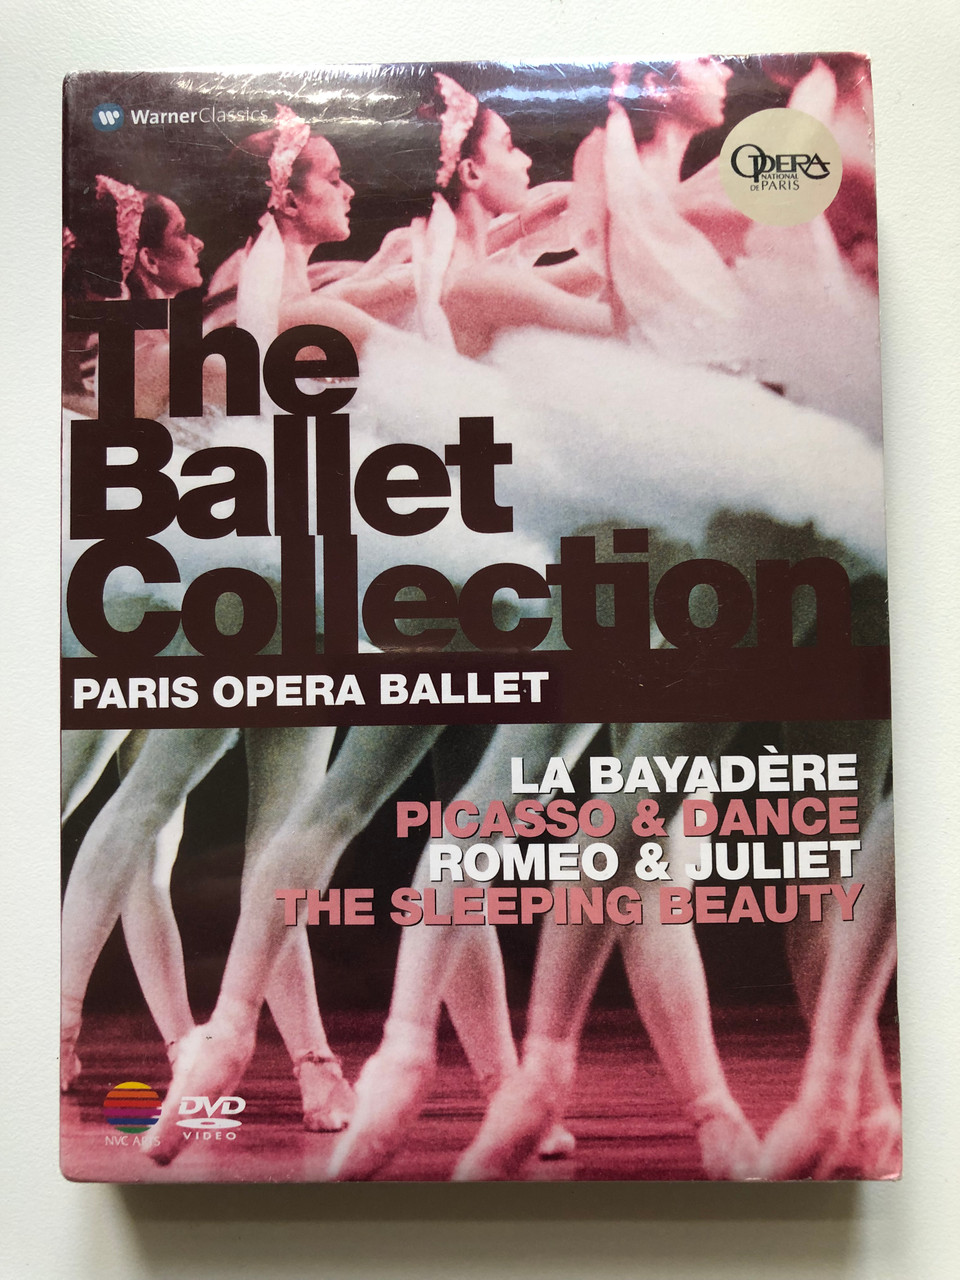 Paris_Opera_Ballet_The_Ballet_Collection_4_DVD_Set_ROMEO_JULIET_-_THE_SLEEPING_BEAUTY_-_The_Blue_Train_-_The_Three-Cornered_Hat_and_others_Record_label_Warner_Classics___68555.1694403548.1280.1280.JPG (960×1280)